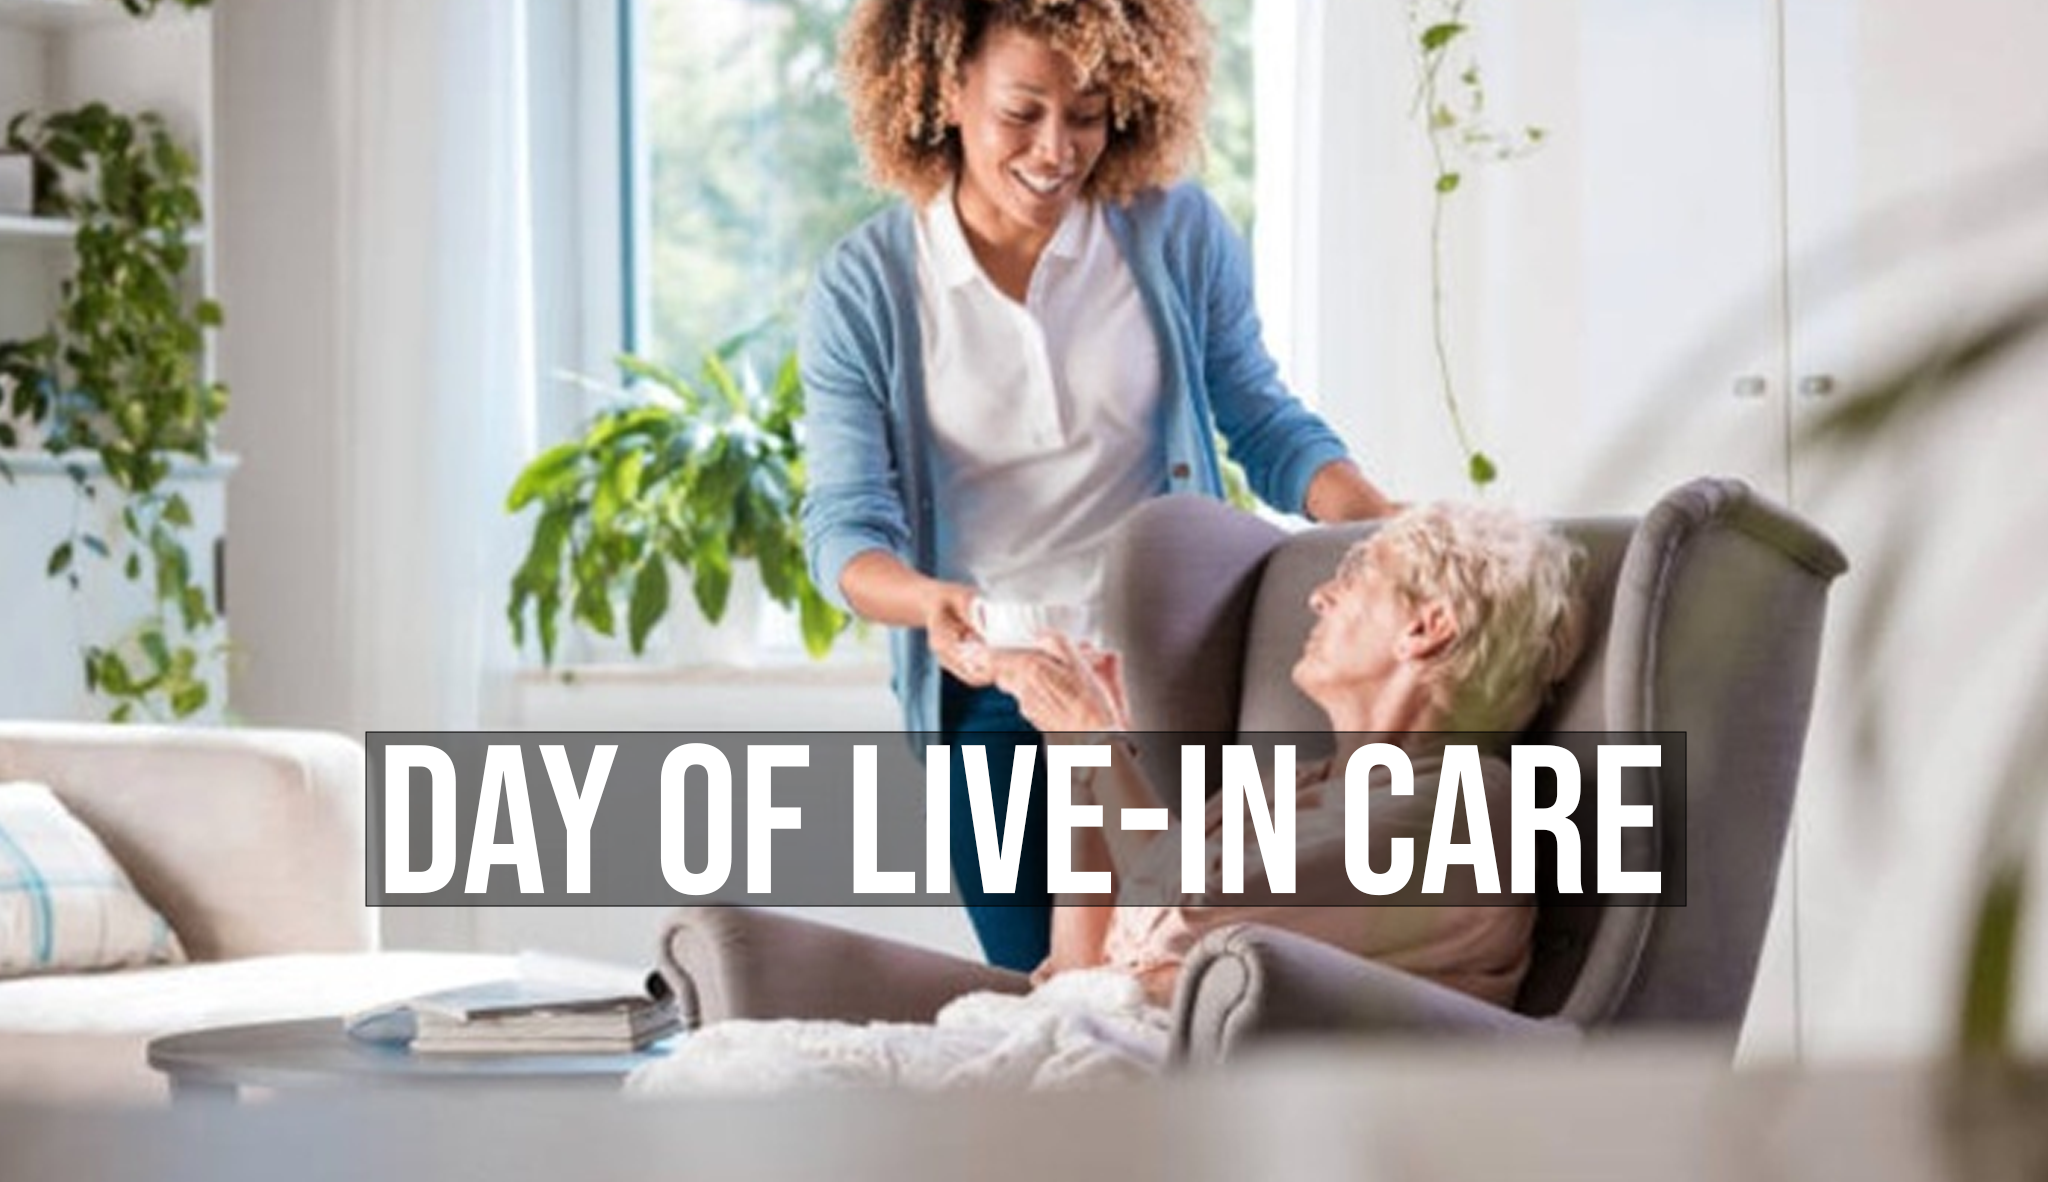 24-Hour Home Care: Live-In Care: Day of Live-In Care - Verrolyne Training